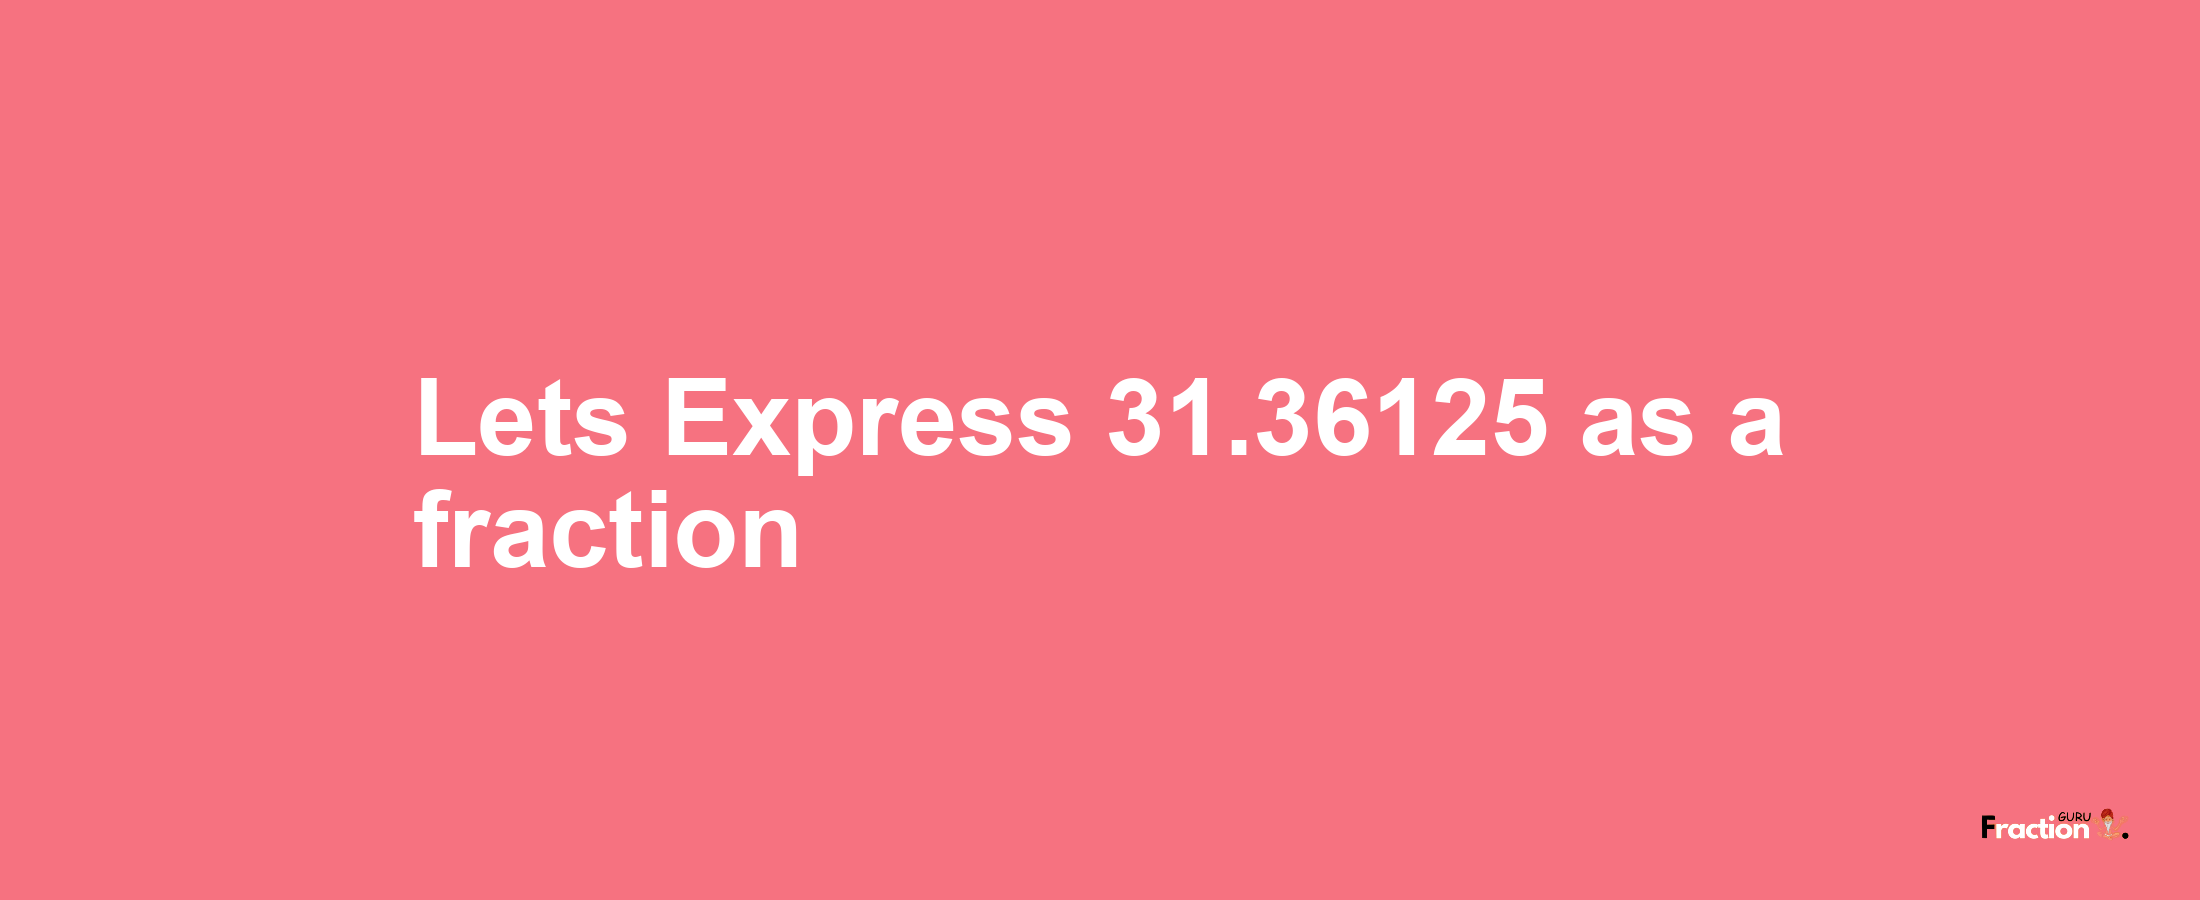 Lets Express 31.36125 as afraction